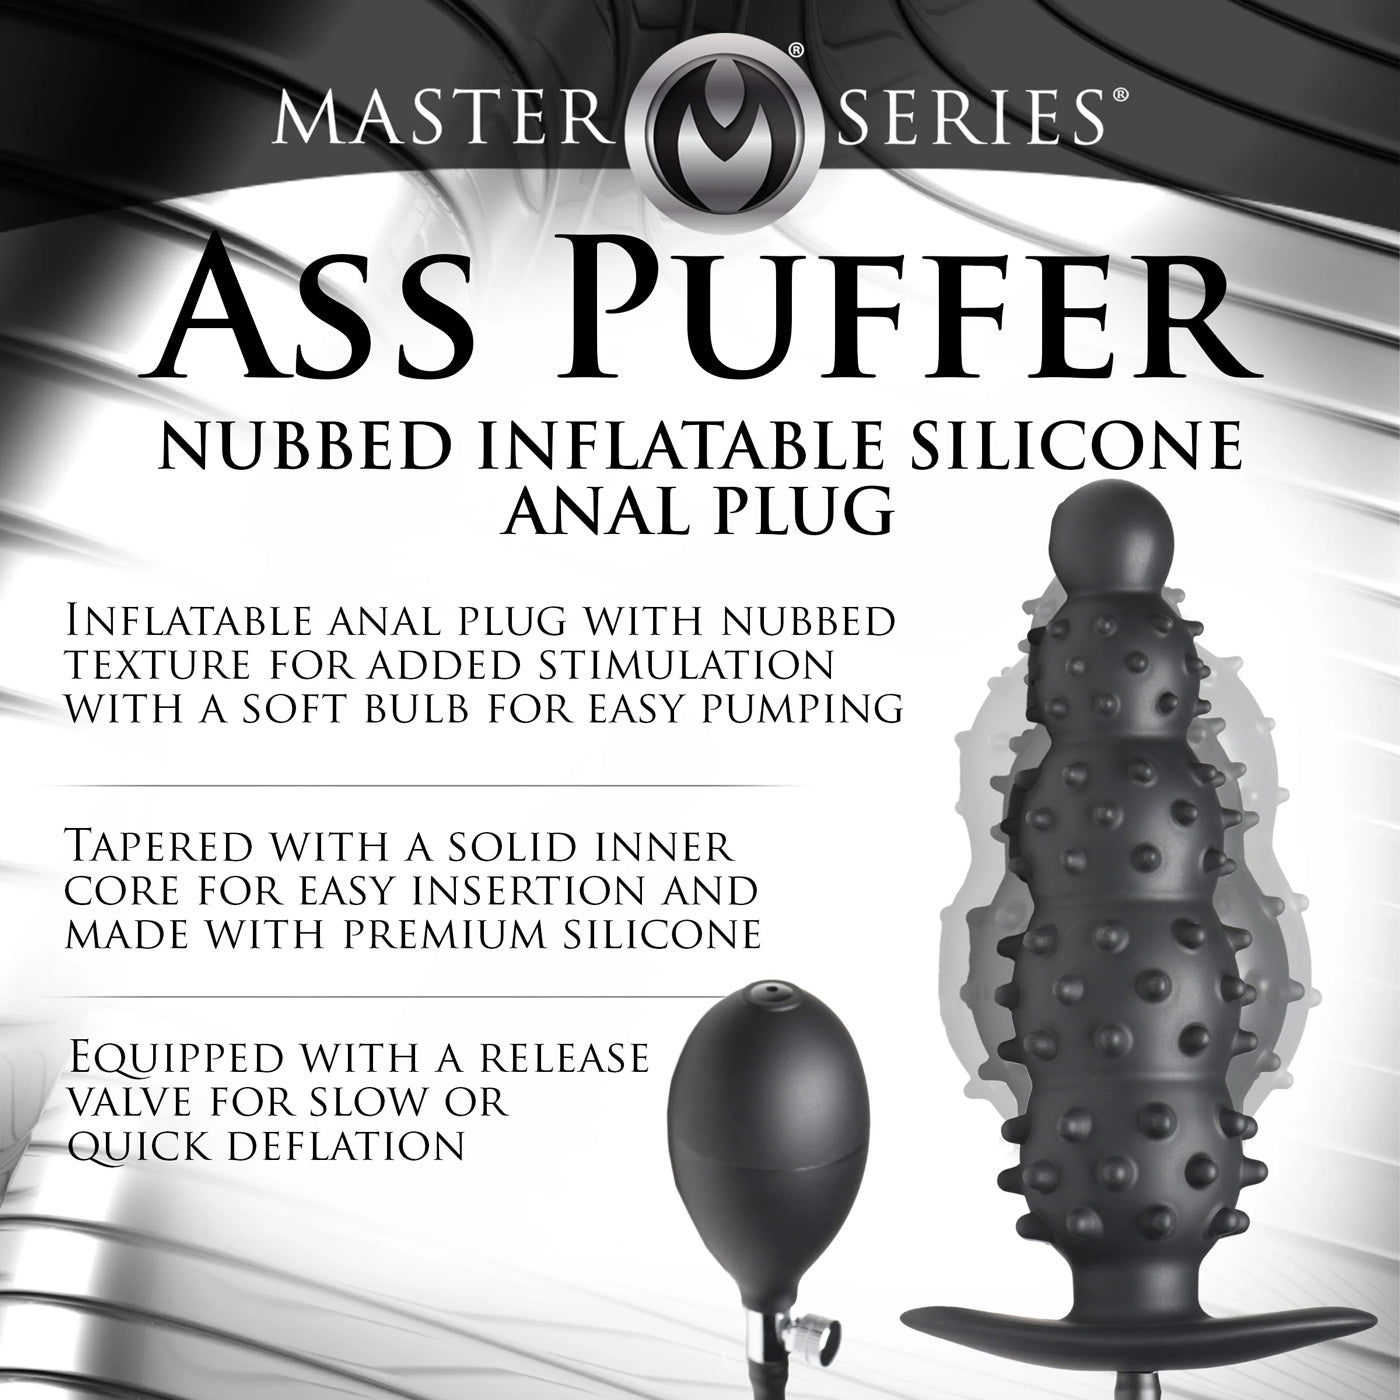 Ass Puffer Nubbed Inflatable Silicone Anal Plug -  Black-4